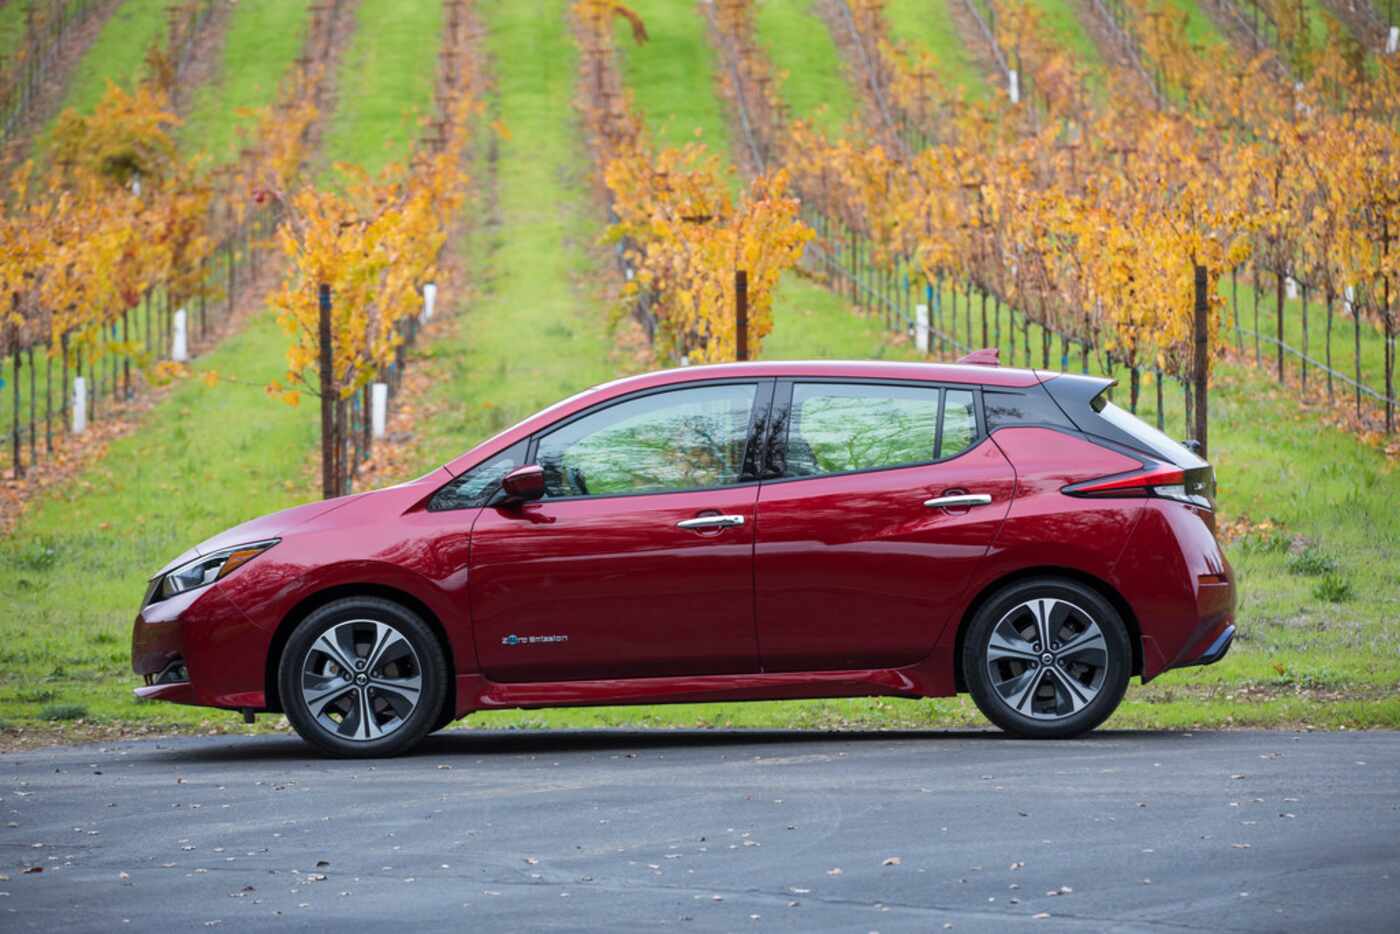 The 2018 Nissan Leaf has a new, sportier design.